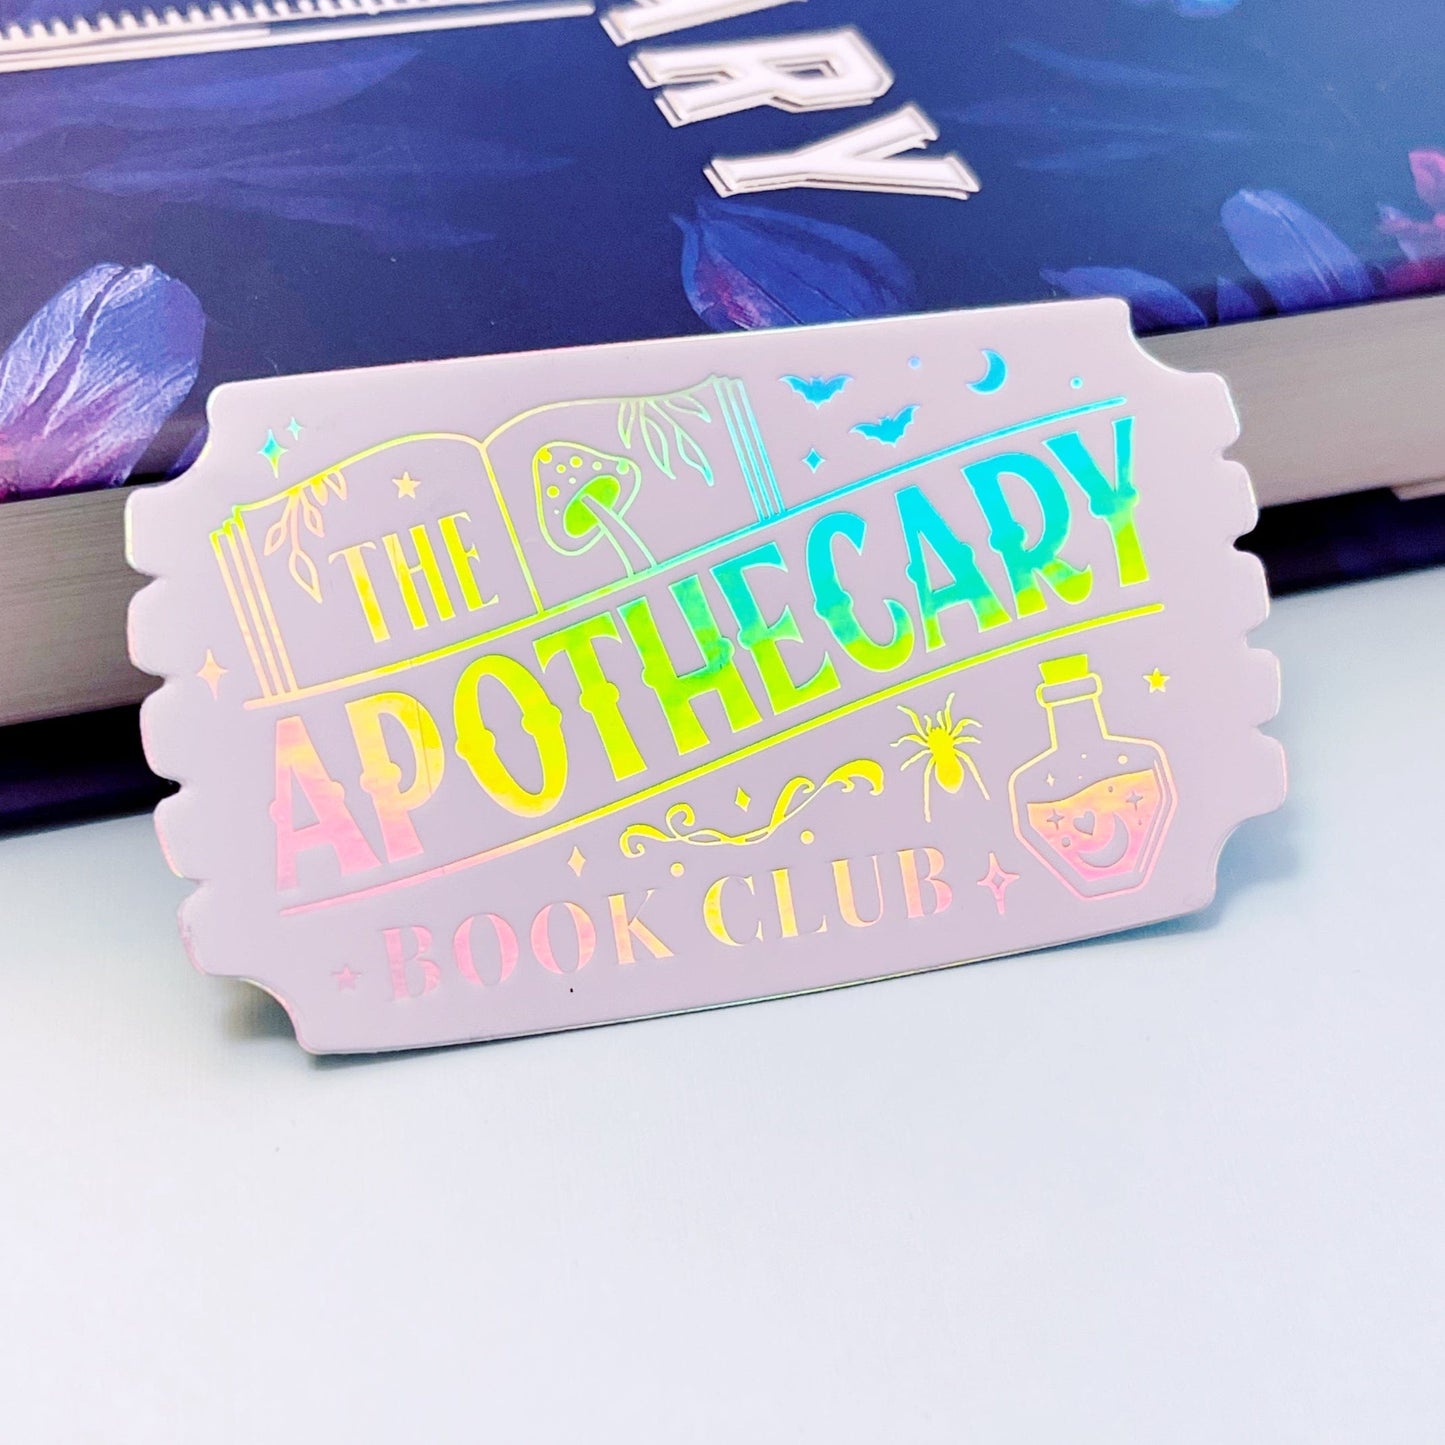 White Holographic The Apothecary Book Club Sticker